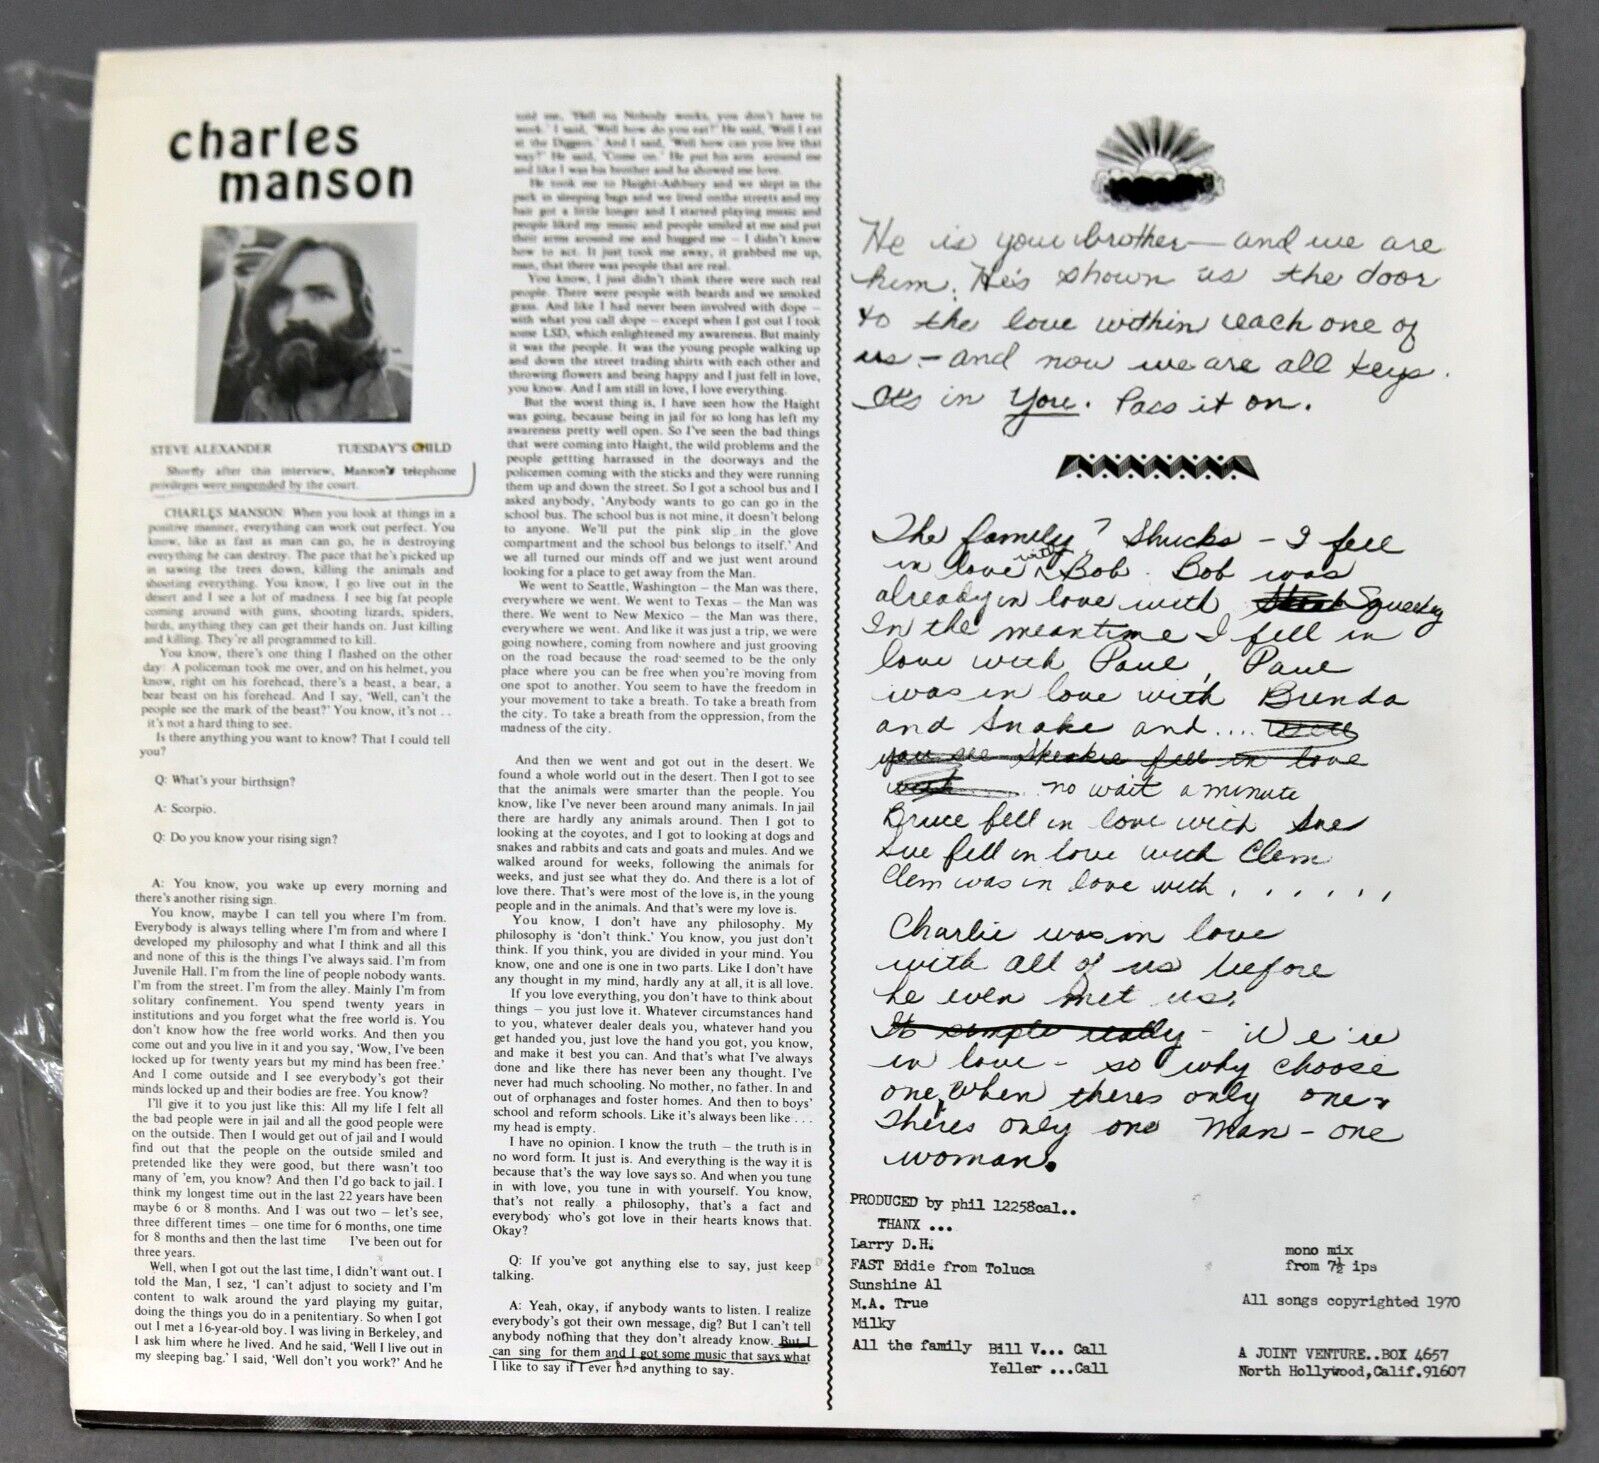 popsike.com - Charles Manson LIE Love And Terror Cults-Awareness 